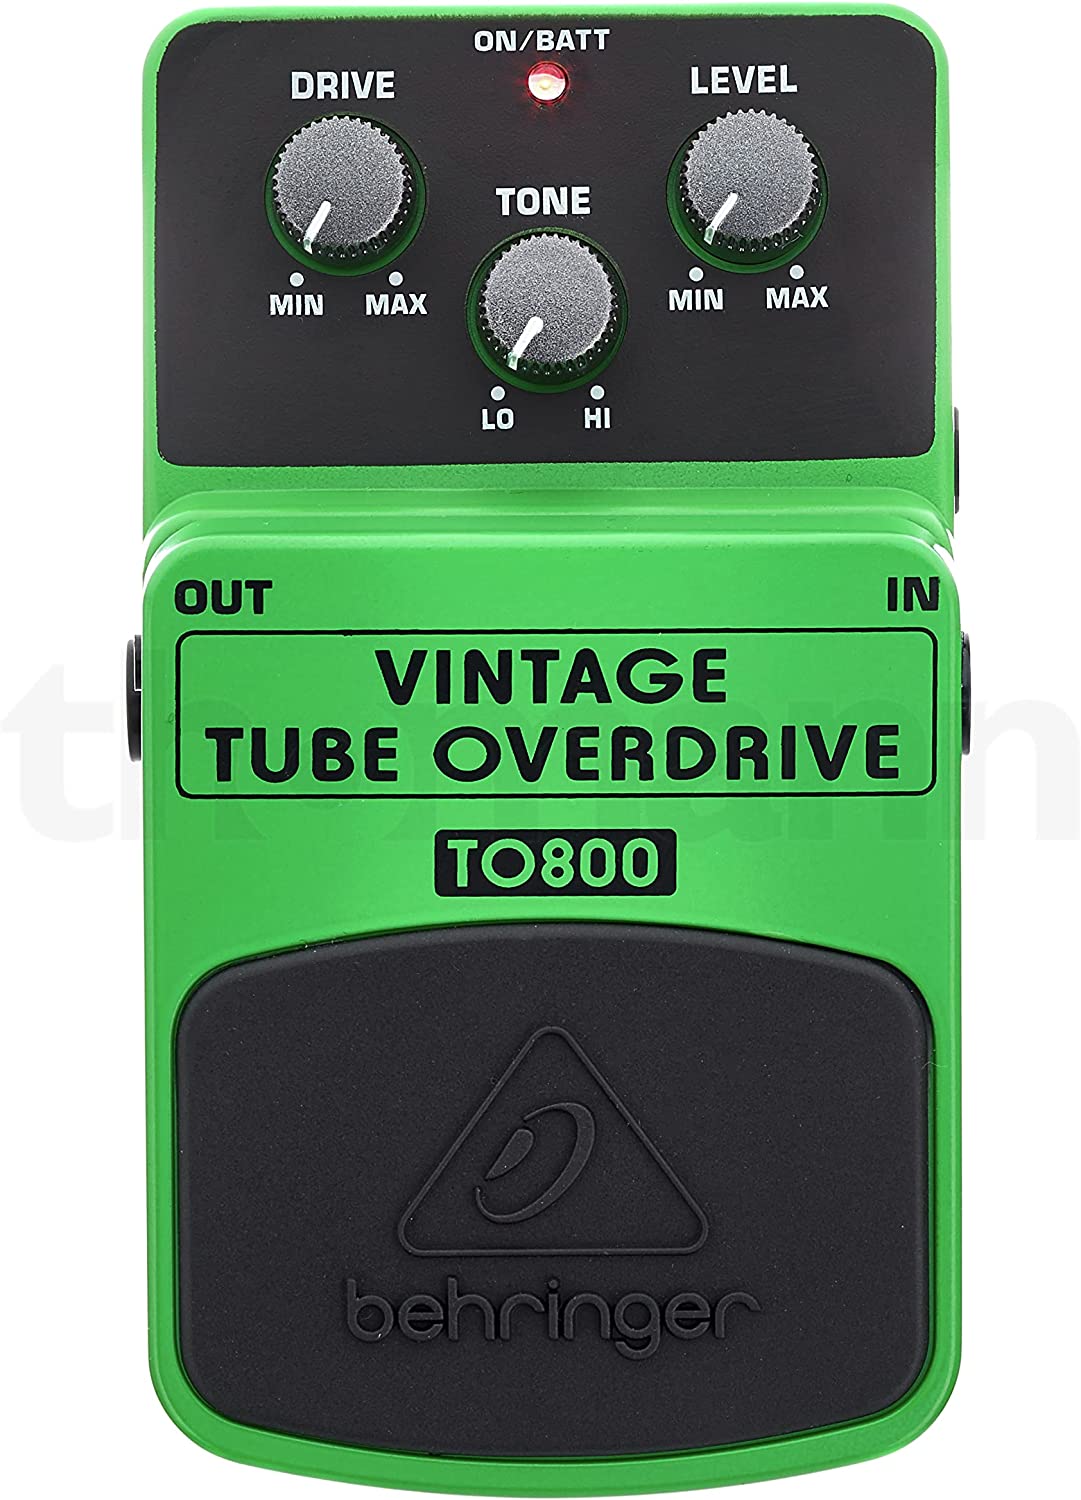 Behringer TO800 Vintage Tube Overdrive Pedal on a white background